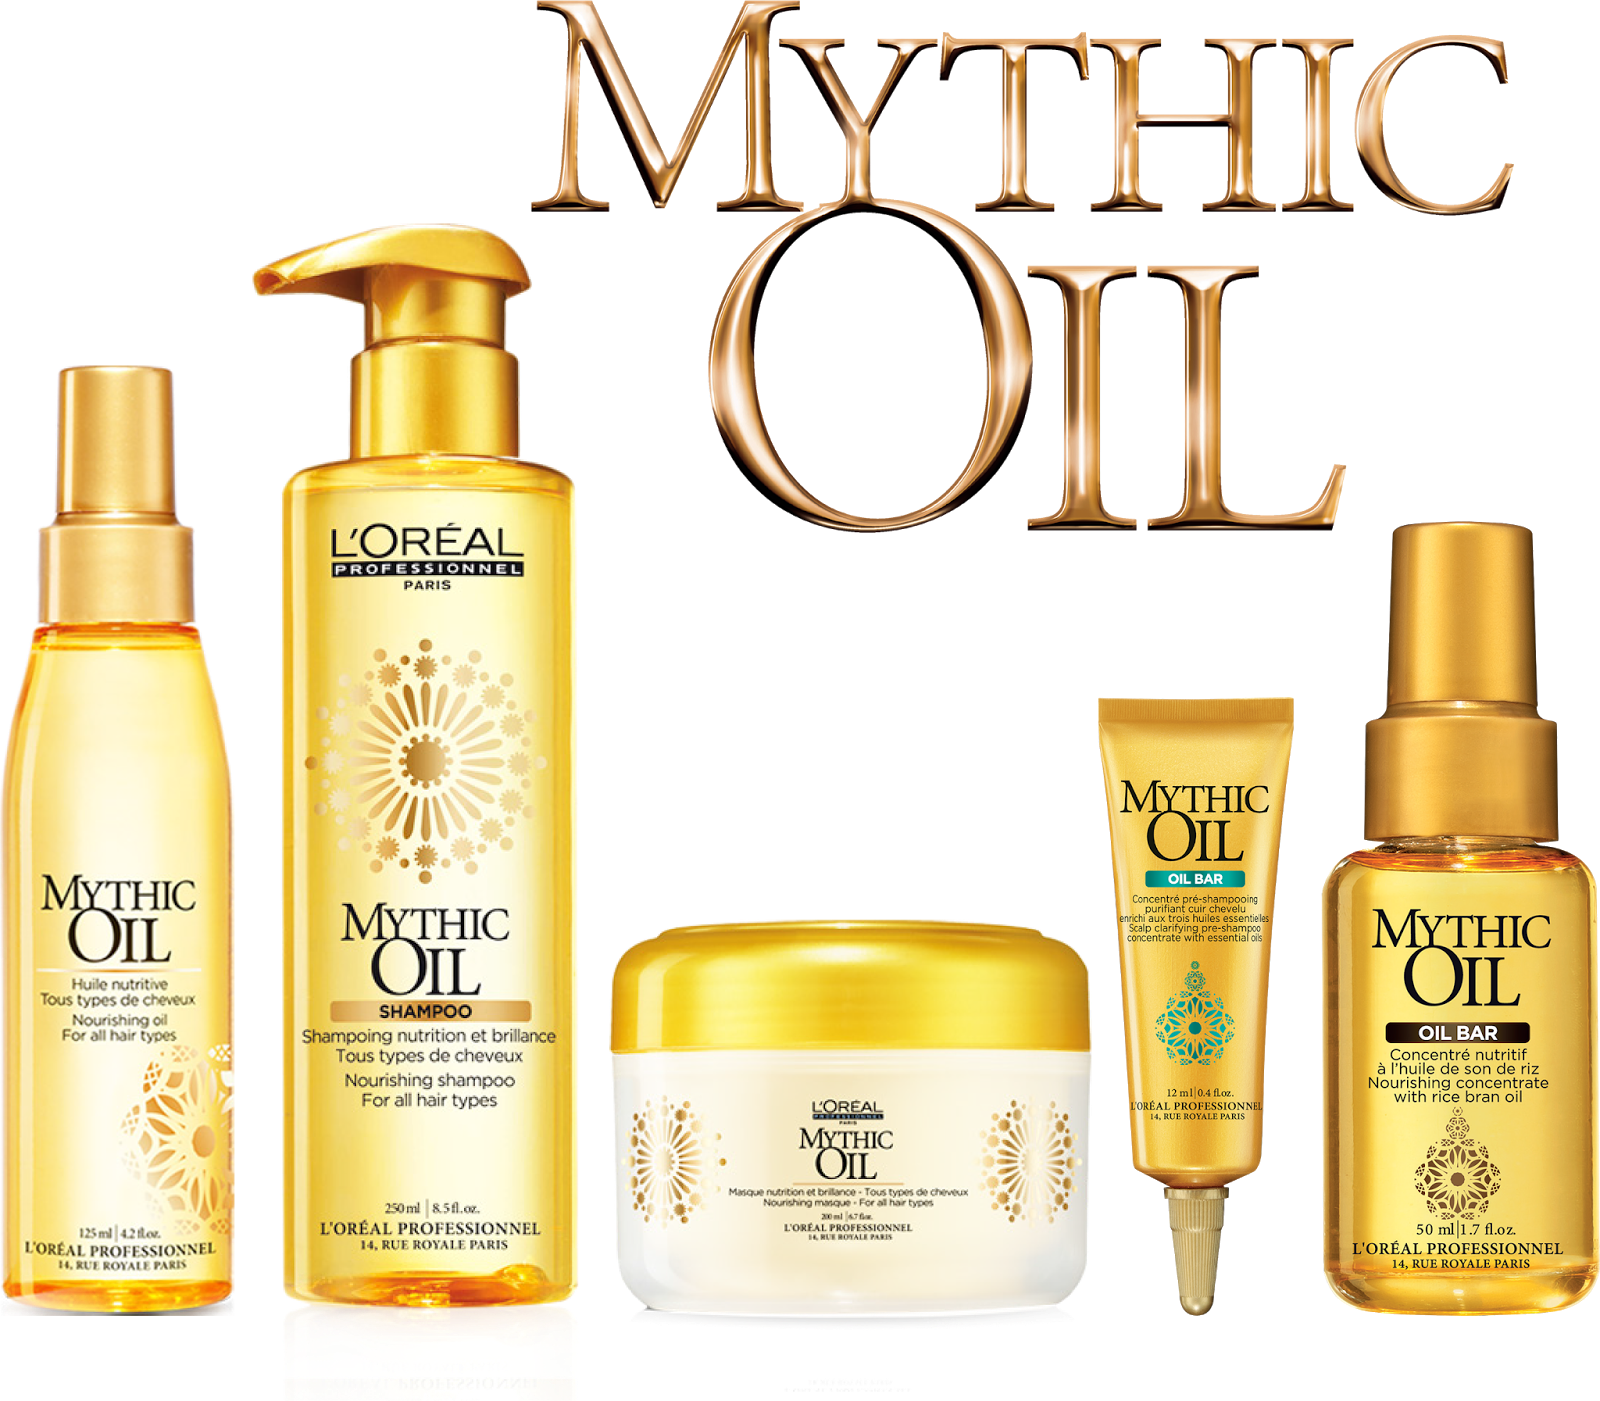 Масло l oreal professionnel. Масло l'Oreal Professionnel Mythic Oil. Loreal professional масло Mythic Oil. L’Oreal Professionnel Mythic Oil Rich Oil;. L’Oreal Professionnel Mythic Oil Nourishing Oil for all hair Types.